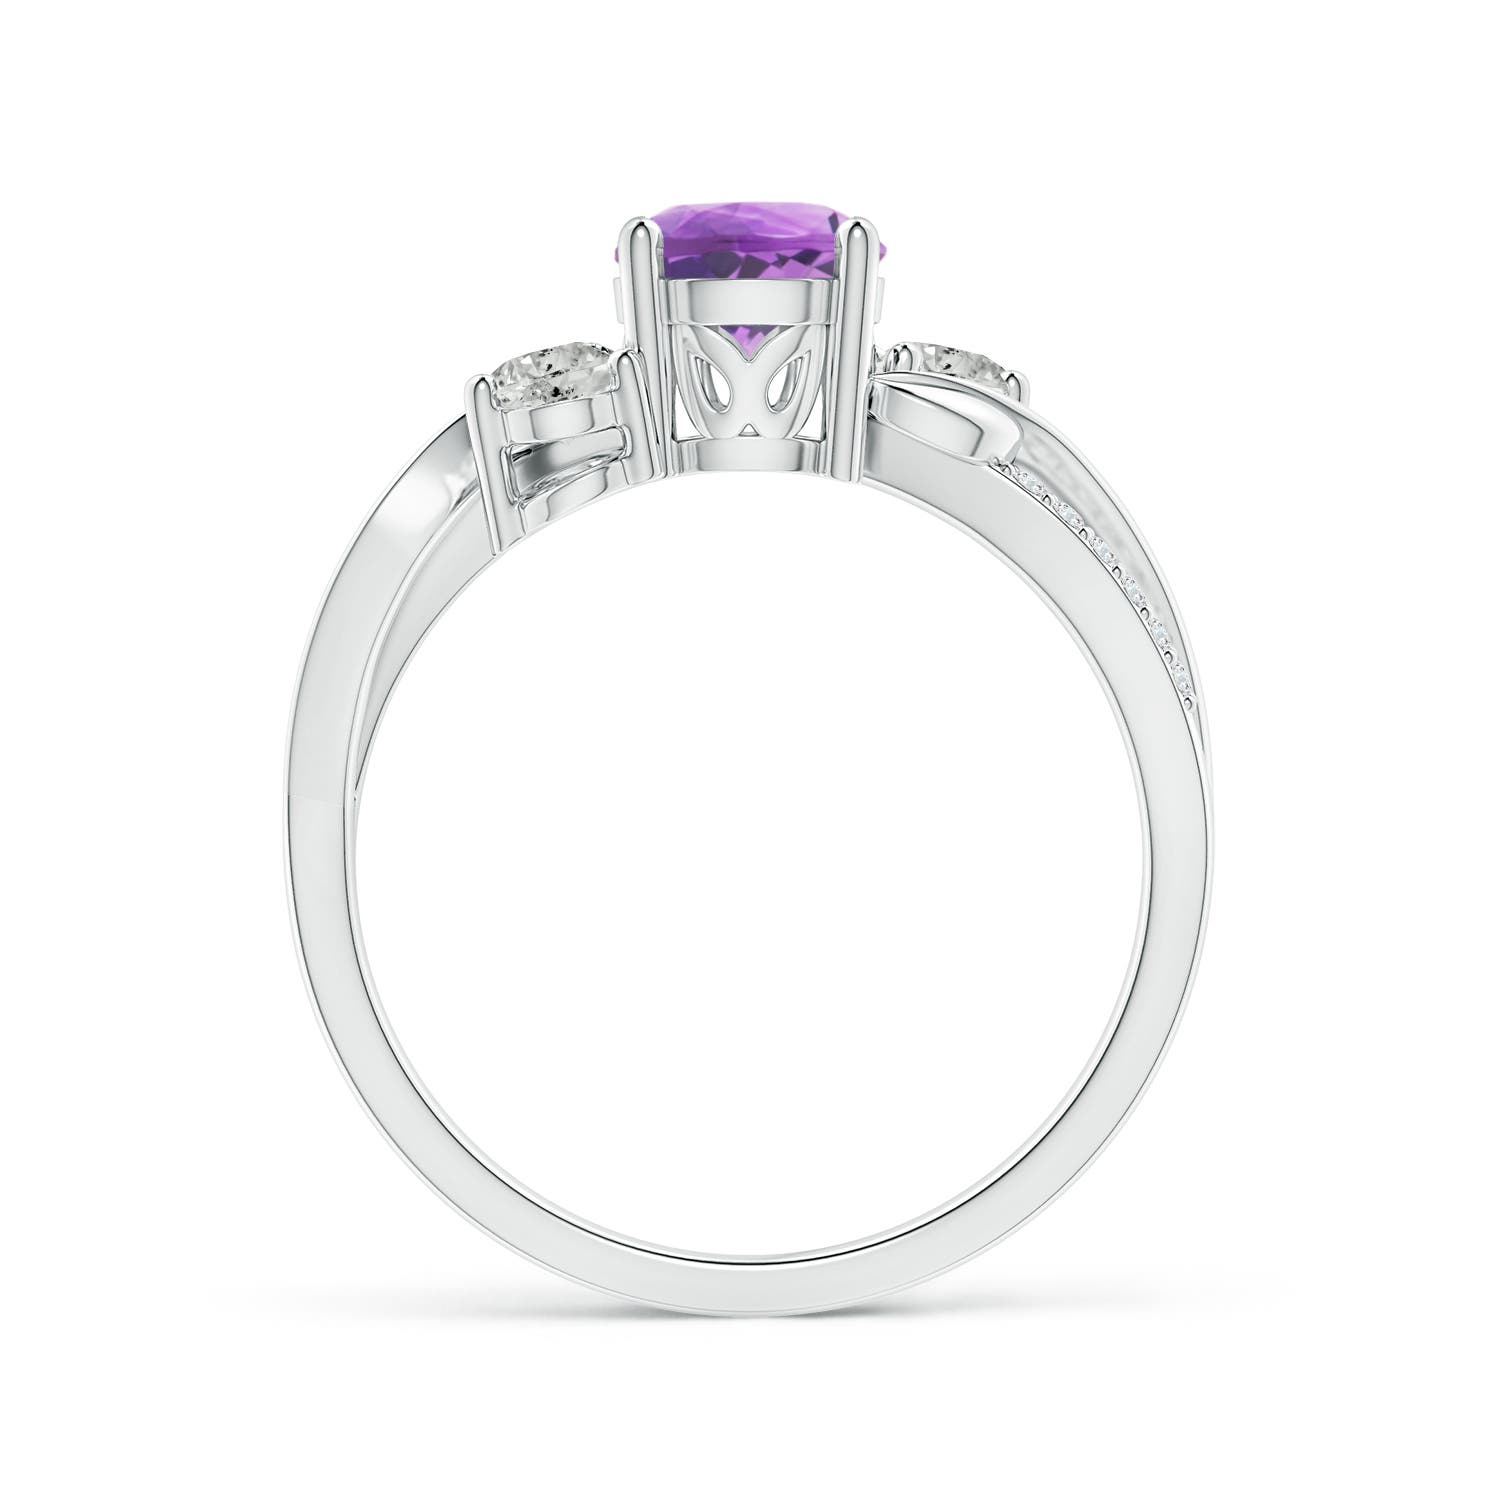 A - Amethyst / 1.07 CT / 14 KT White Gold